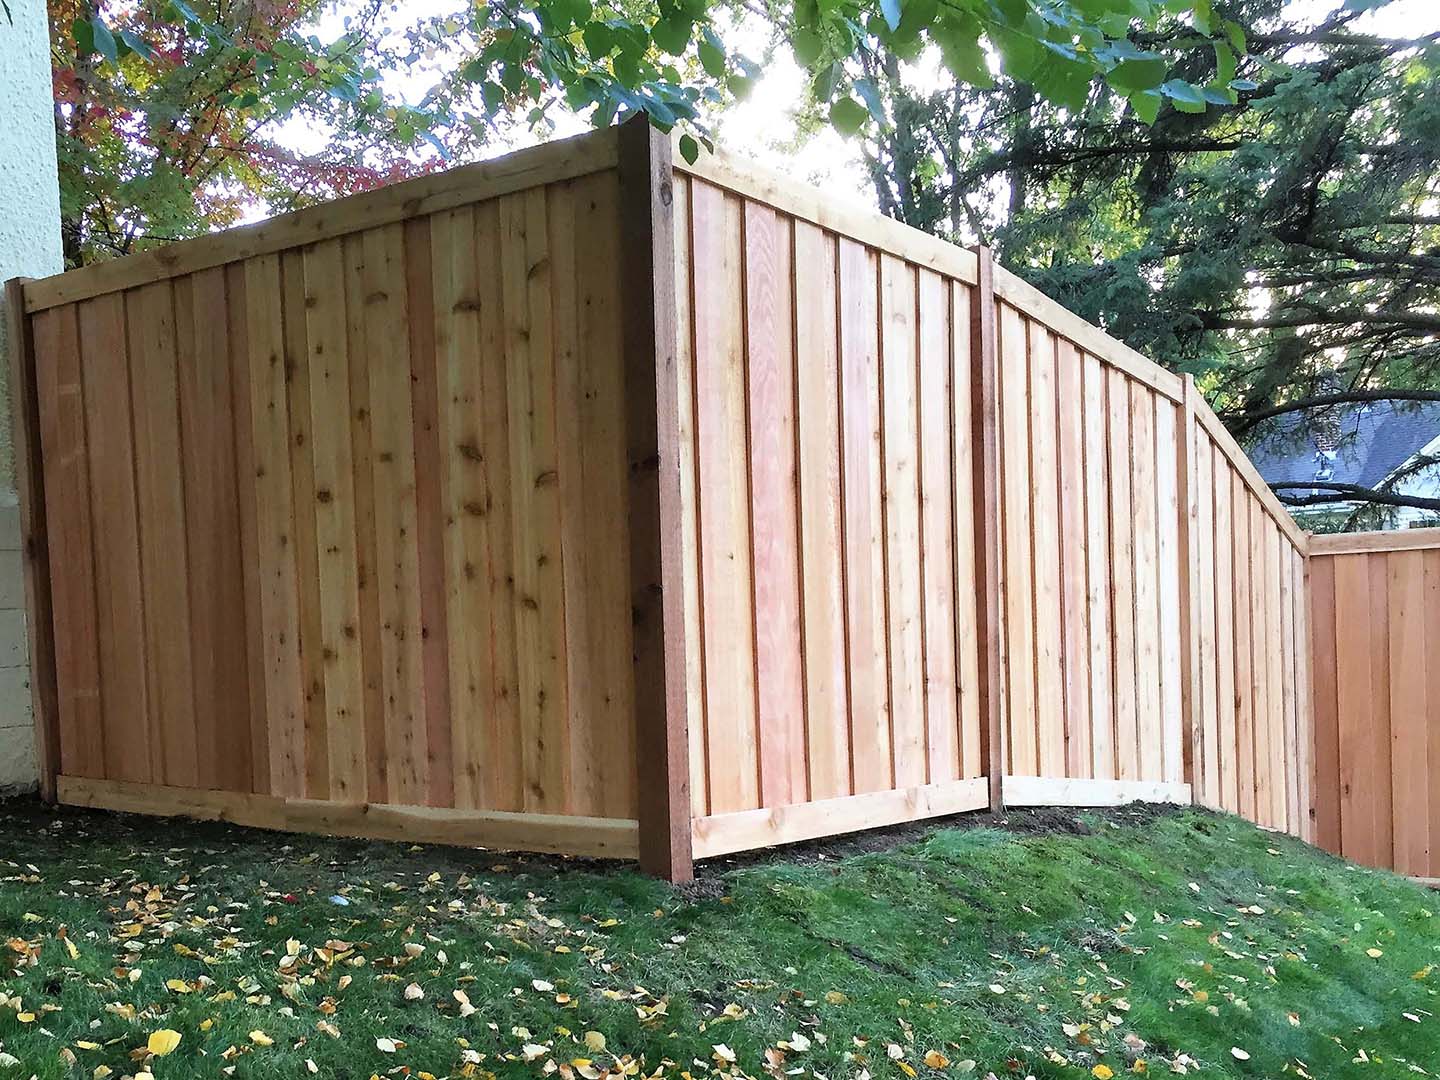 Stacy MN cap and trim style wood fence